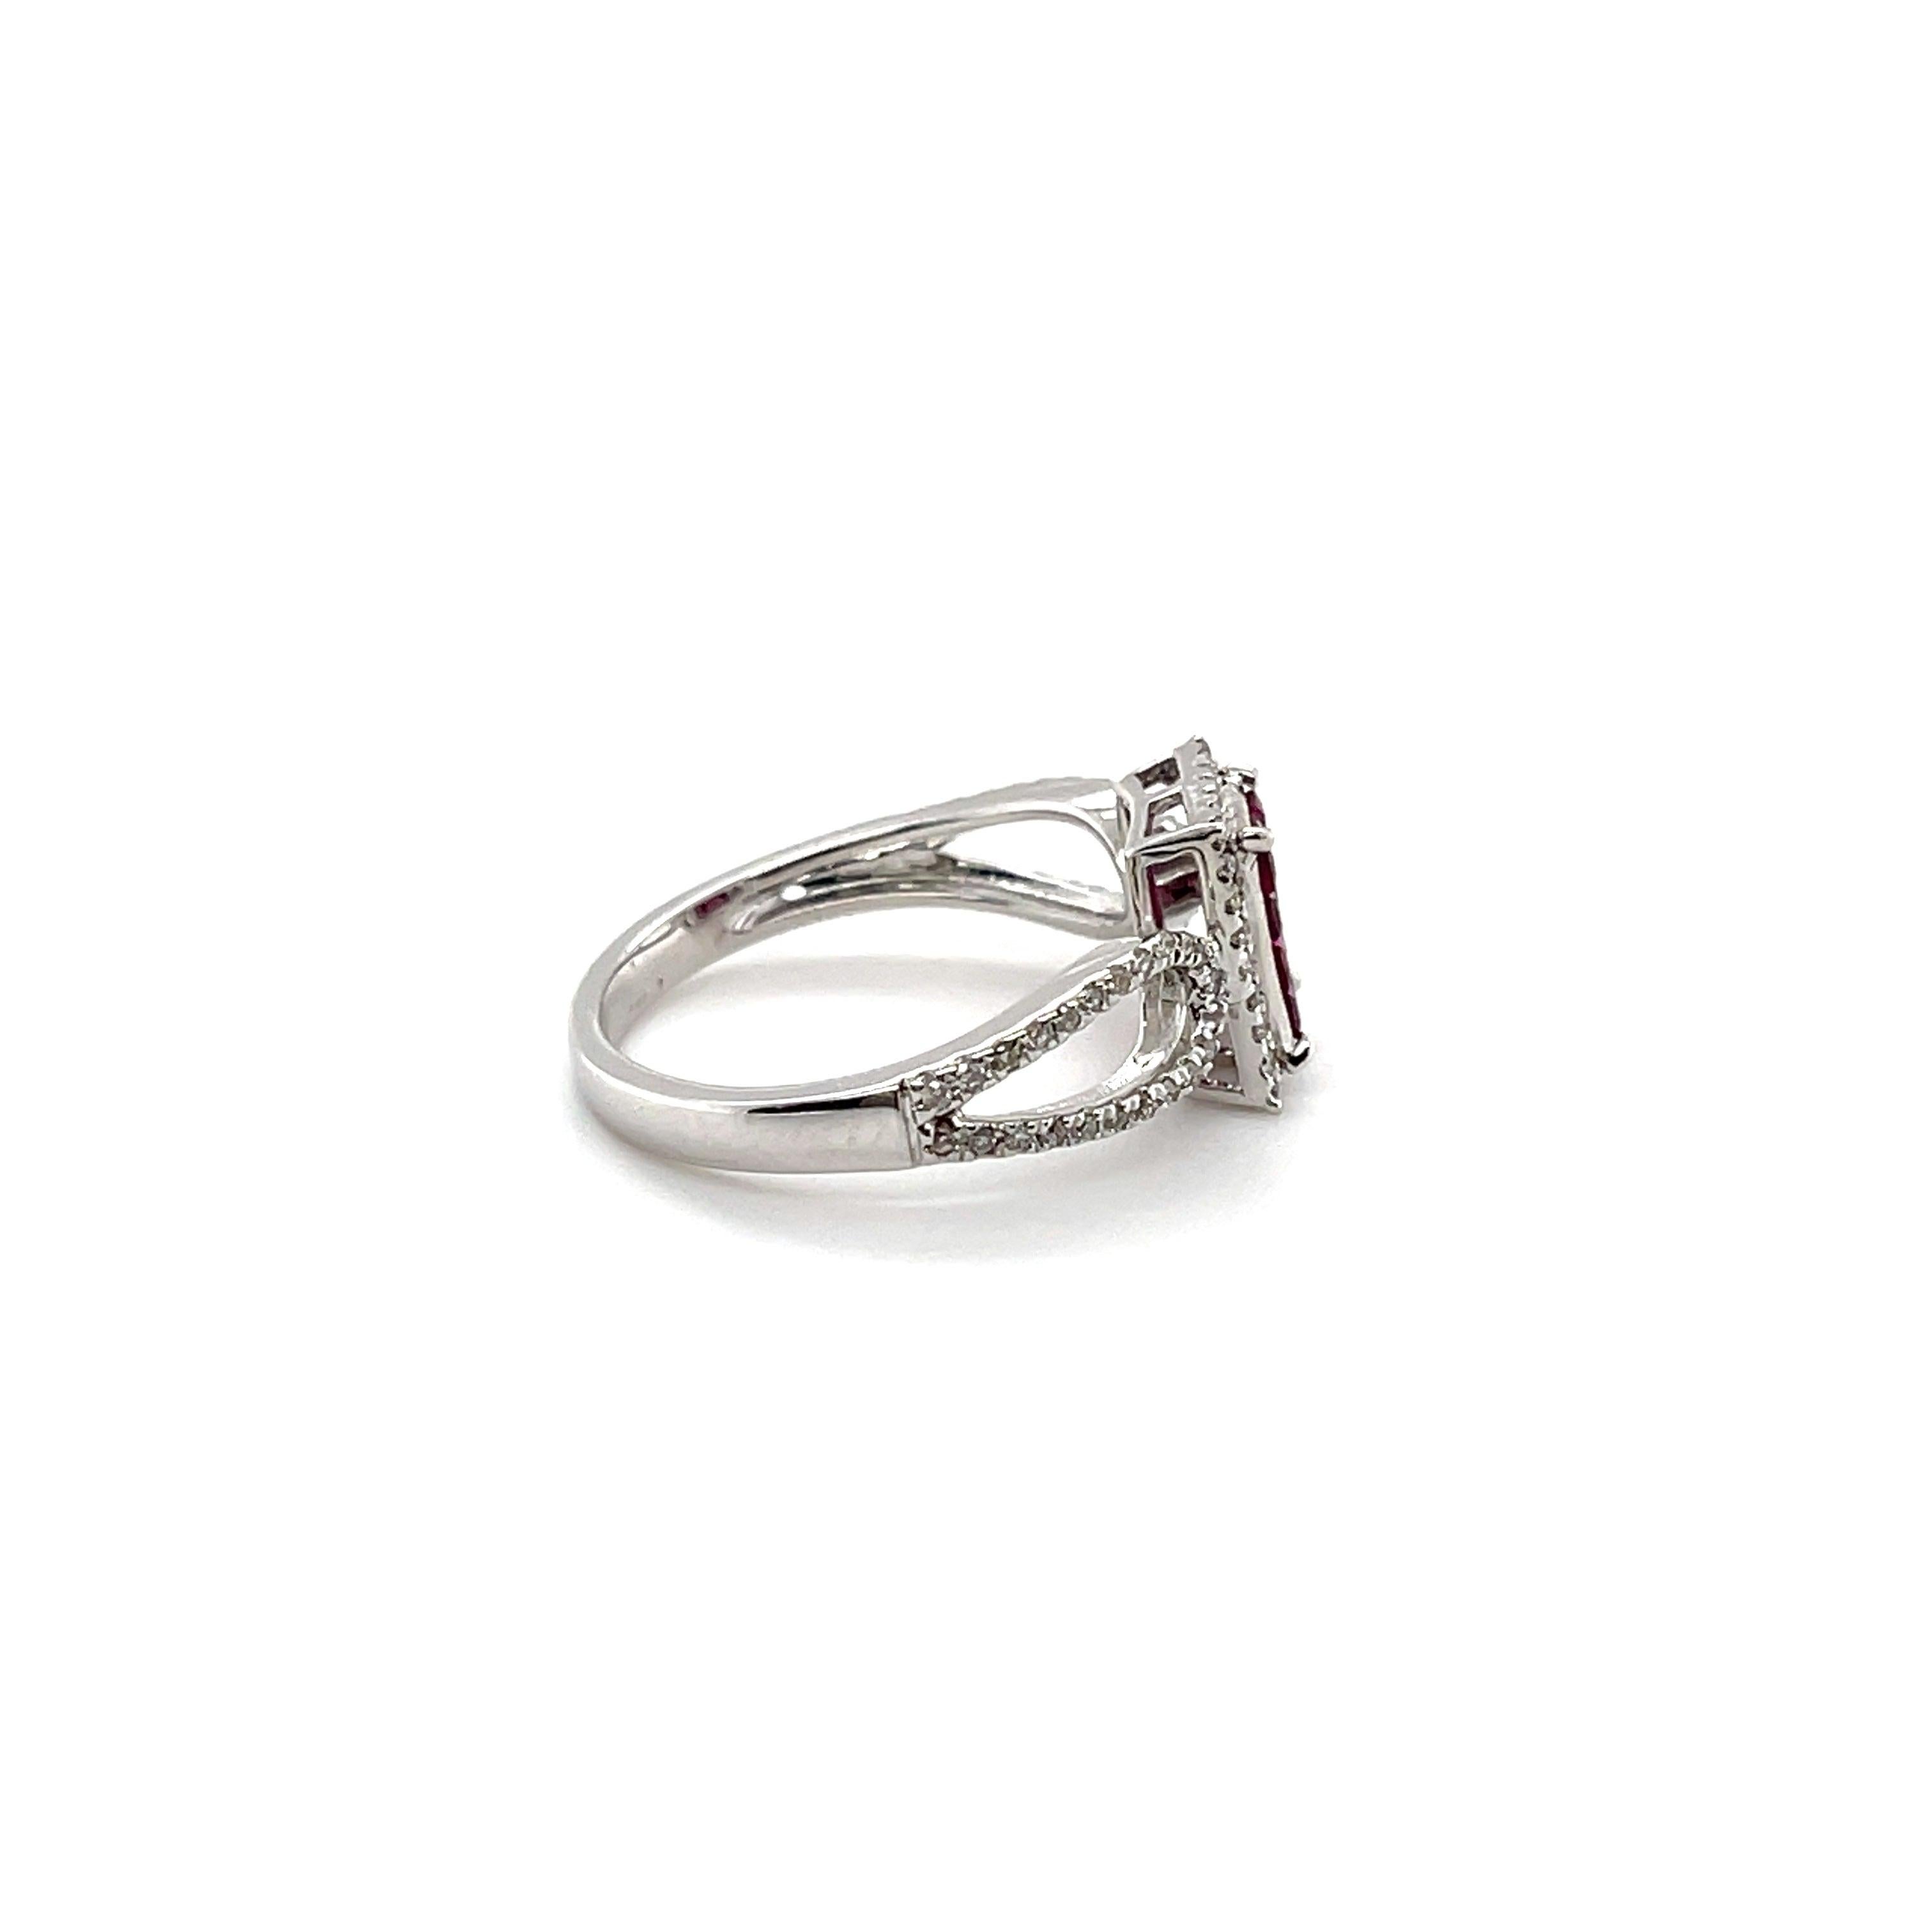 Ruby and diamonds, crafted in eighteen karat white gold, complemented by a polished finish design. 

Ruby weight: 0.46CT 

Diamond weight: 0.20CT 

Item Weight: 2.89G 

18KWG 

Complimentary resizing upon purchase!

